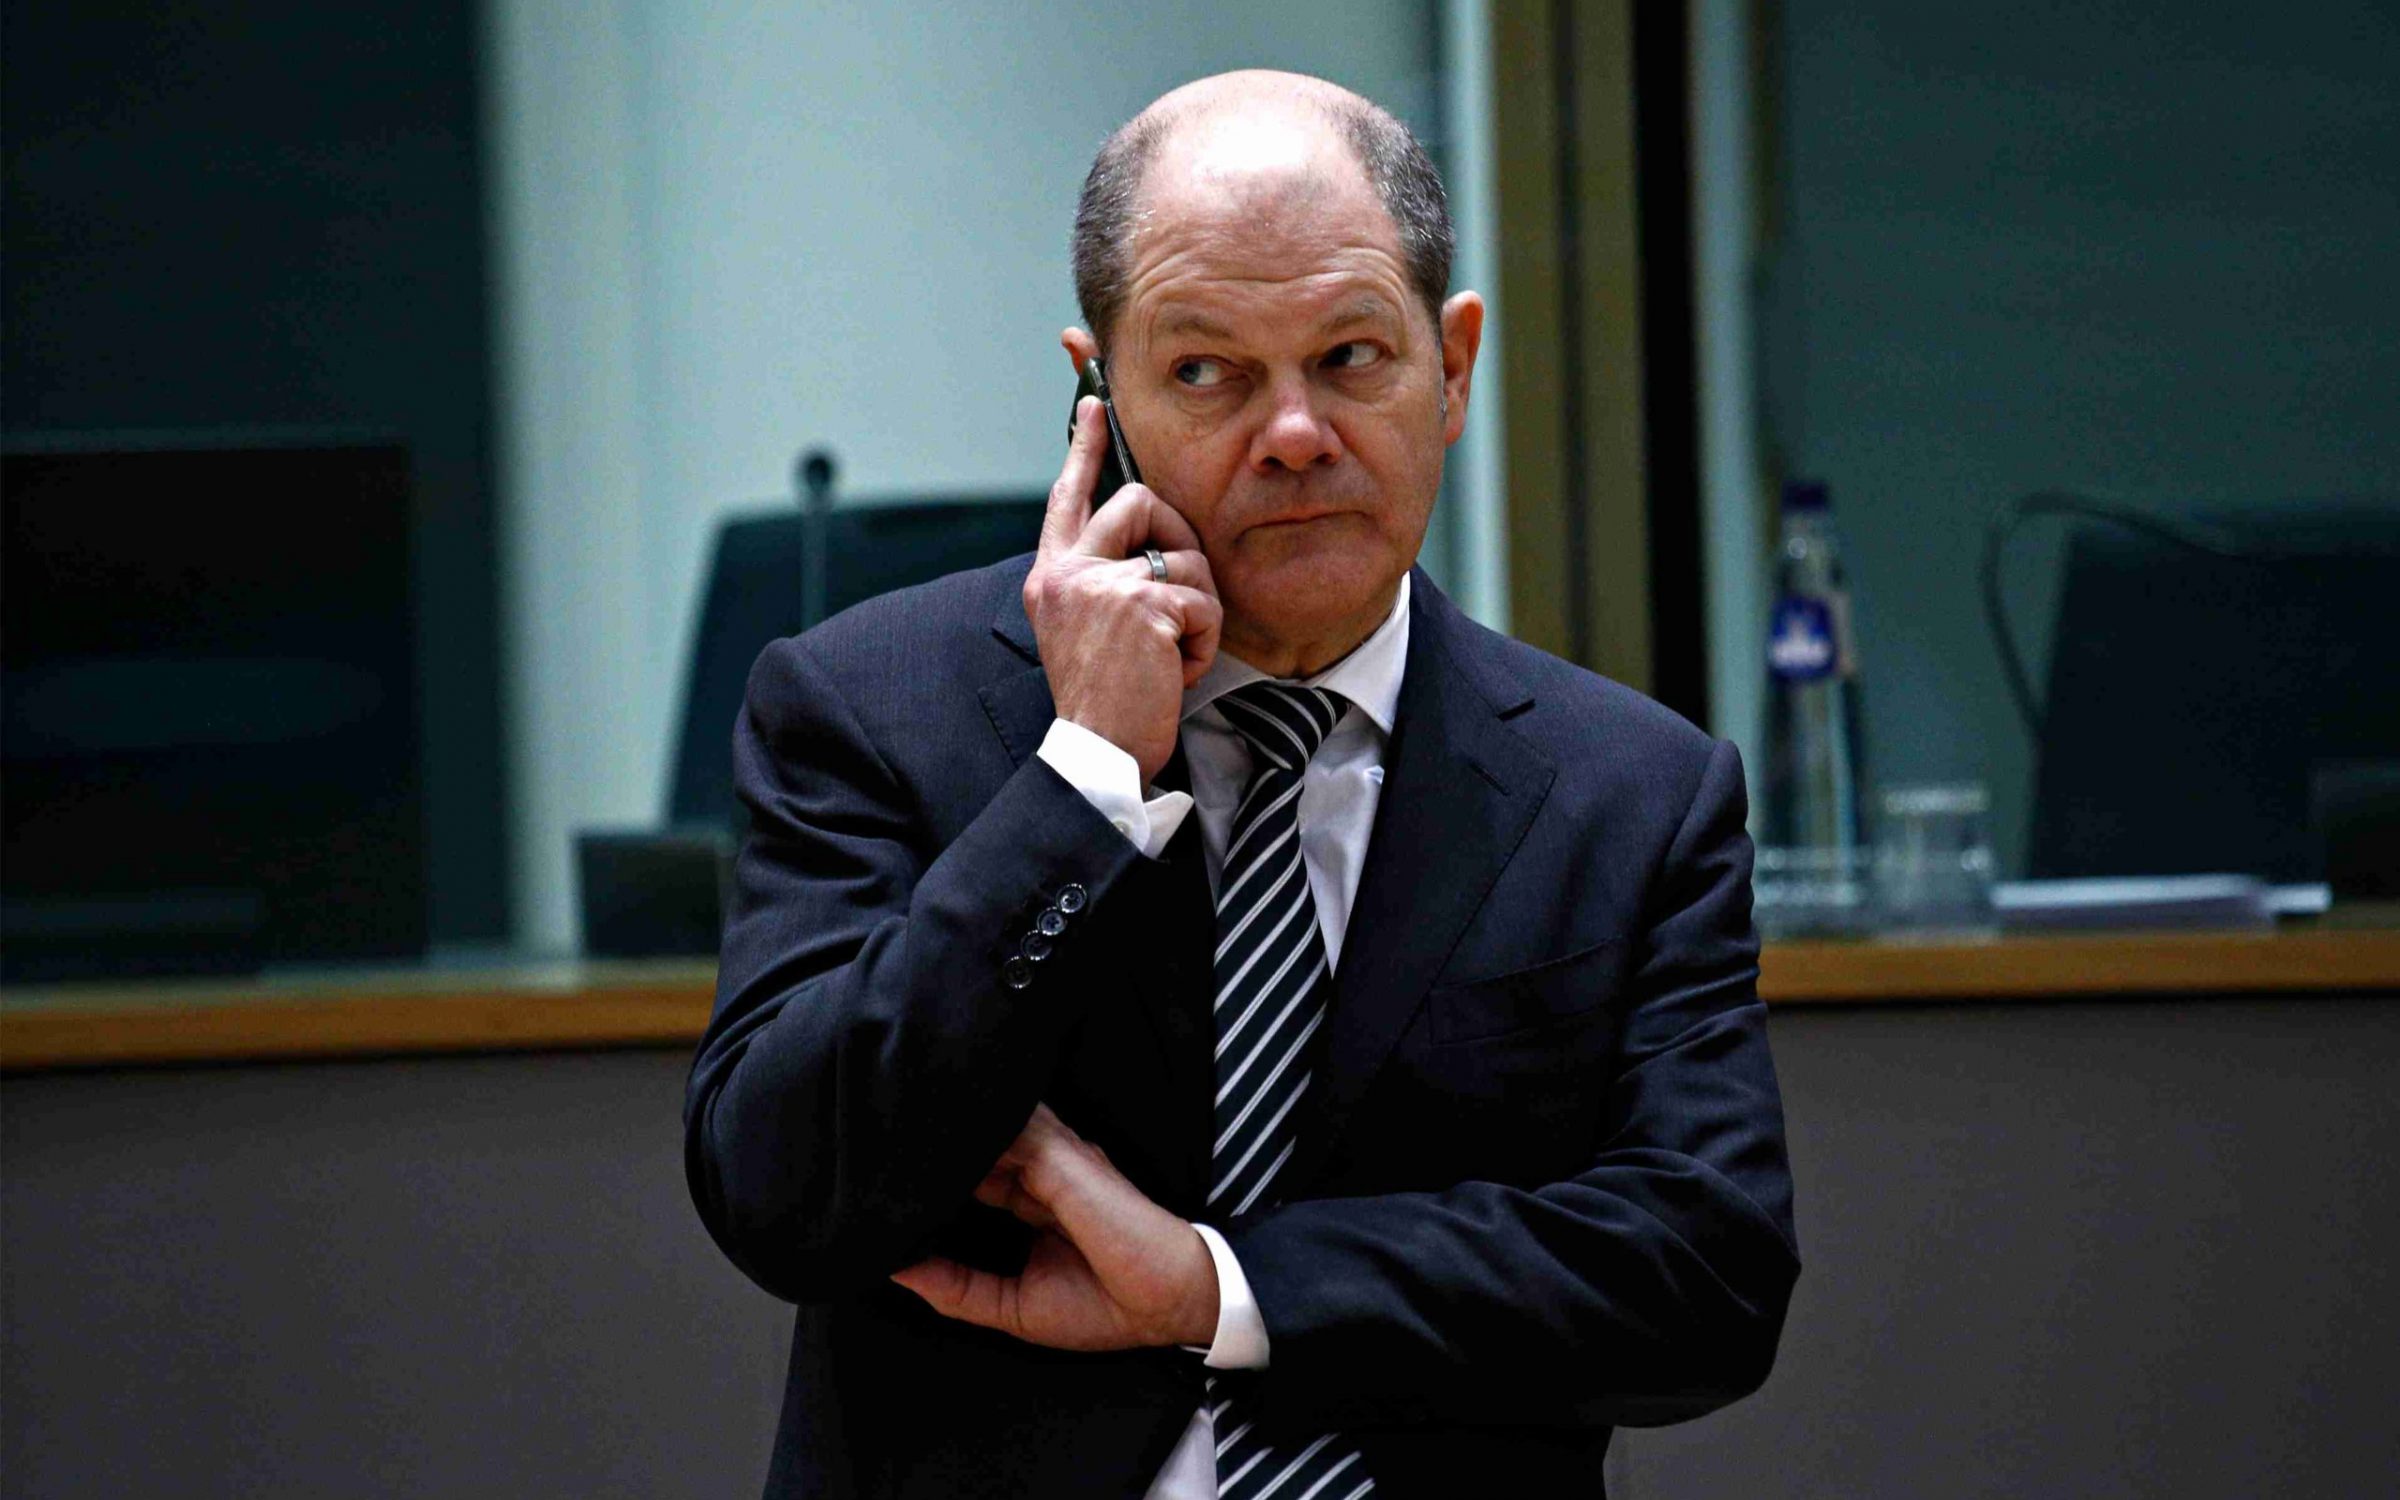 Finance Minister of Germany Olaf Scholz attends in an Eurogroup finance ministers meeting at the EU headquarters